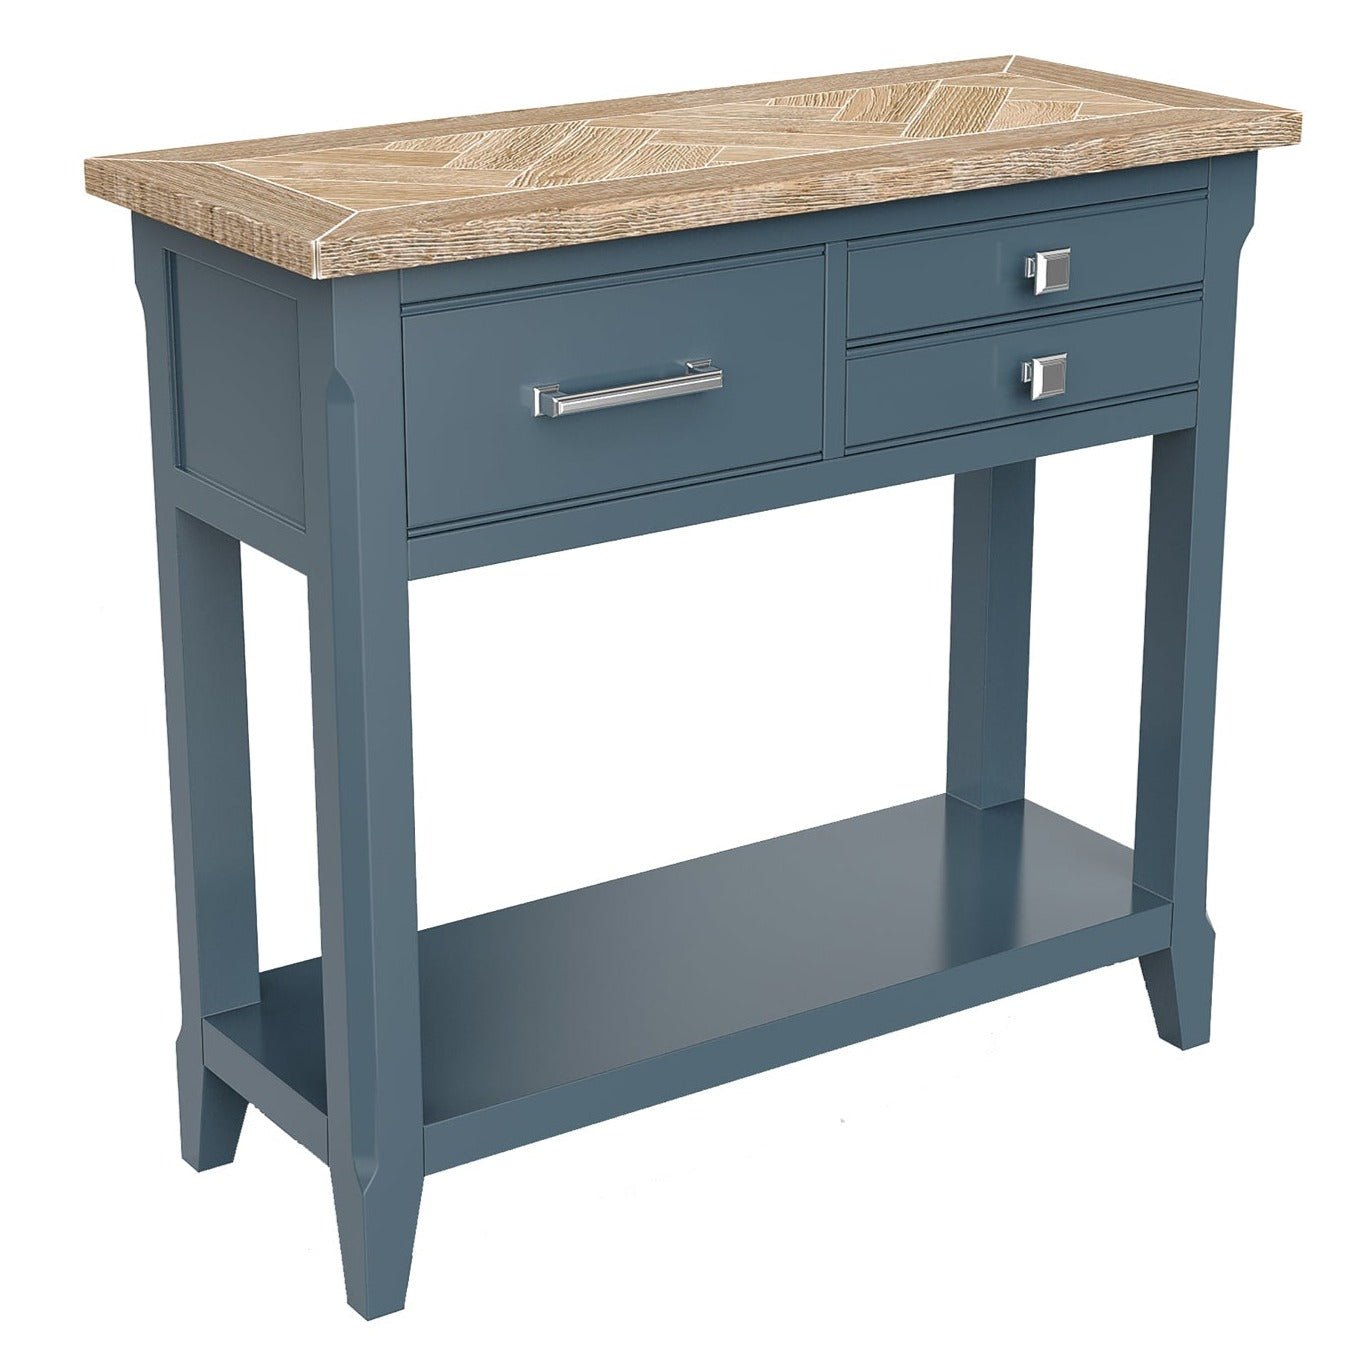 Signature Blue - Reclaimed Small Console Table - Duck Barn Interiors